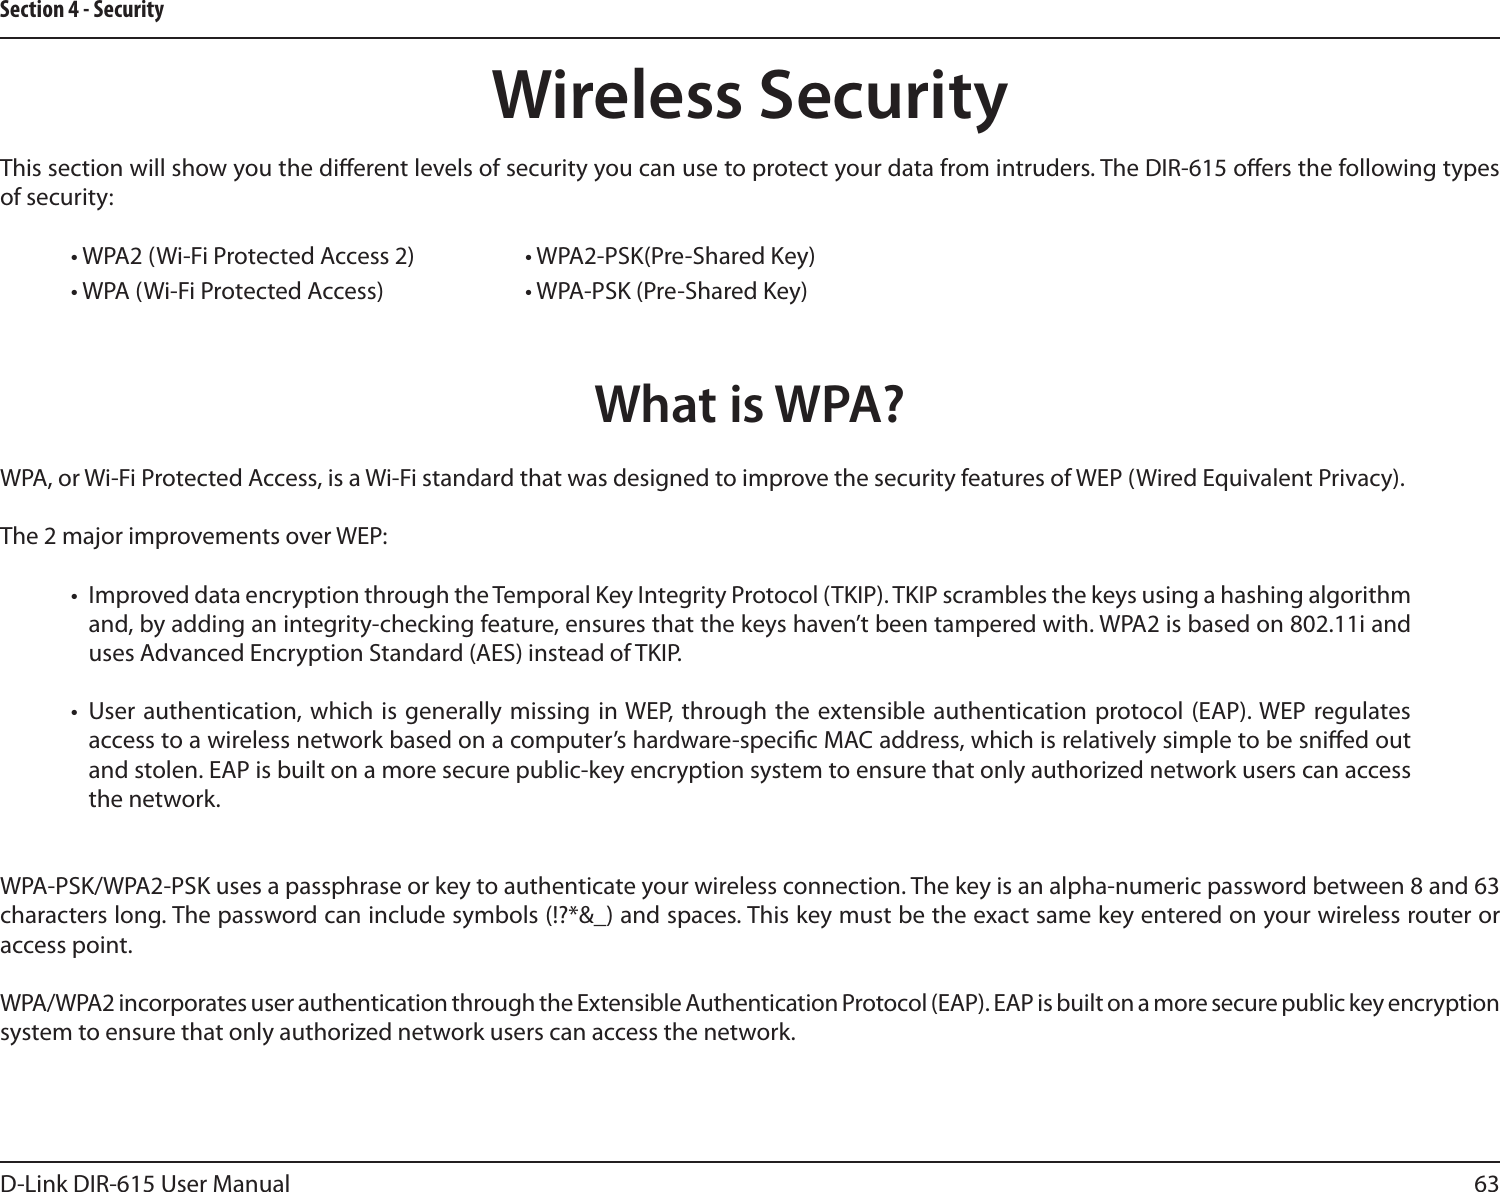 63D-Link DIR-615 User ManualSection 4 - SecurityWireless SecurityThis section will show you the dierent levels of security you can use to protect your data from intruders. The DIR-615 oers the following types of security:• WPA2 (Wi-Fi Protected Access 2)     • WPA2-PSK(Pre-Shared Key)• WPA (Wi-Fi Protected Access)    • WPA-PSK (Pre-Shared Key)What is WPA?WPA, or Wi-Fi Protected Access, is a Wi-Fi standard that was designed to improve the security features of WEP (Wired Equivalent Privacy).  The 2 major improvements over WEP: •  Improved data encryption through the Temporal Key Integrity Protocol (TKIP). TKIP scrambles the keys using a hashing algorithm and, by adding an integrity-checking feature, ensures that the keys haven’t been tampered with. WPA2 is based on 802.11i and uses Advanced Encryption Standard (AES) instead of TKIP.•  User authentication, which  is generally missing  in WEP, through the extensible authentication protocol (EAP). WEP  regulates access to a wireless network based on a computer’s hardware-specic MAC address, which is relatively simple to be snied out and stolen. EAP is built on a more secure public-key encryption system to ensure that only authorized network users can access the network.WPA-PSK/WPA2-PSK uses a passphrase or key to authenticate your wireless connection. The key is an alpha-numeric password between 8 and 63 characters long. The password can include symbols (!?*&amp;_) and spaces. This key must be the exact same key entered on your wireless router or access point.WPA/WPA2 incorporates user authentication through the Extensible Authentication Protocol (EAP). EAP is built on a more secure public key encryption system to ensure that only authorized network users can access the network.